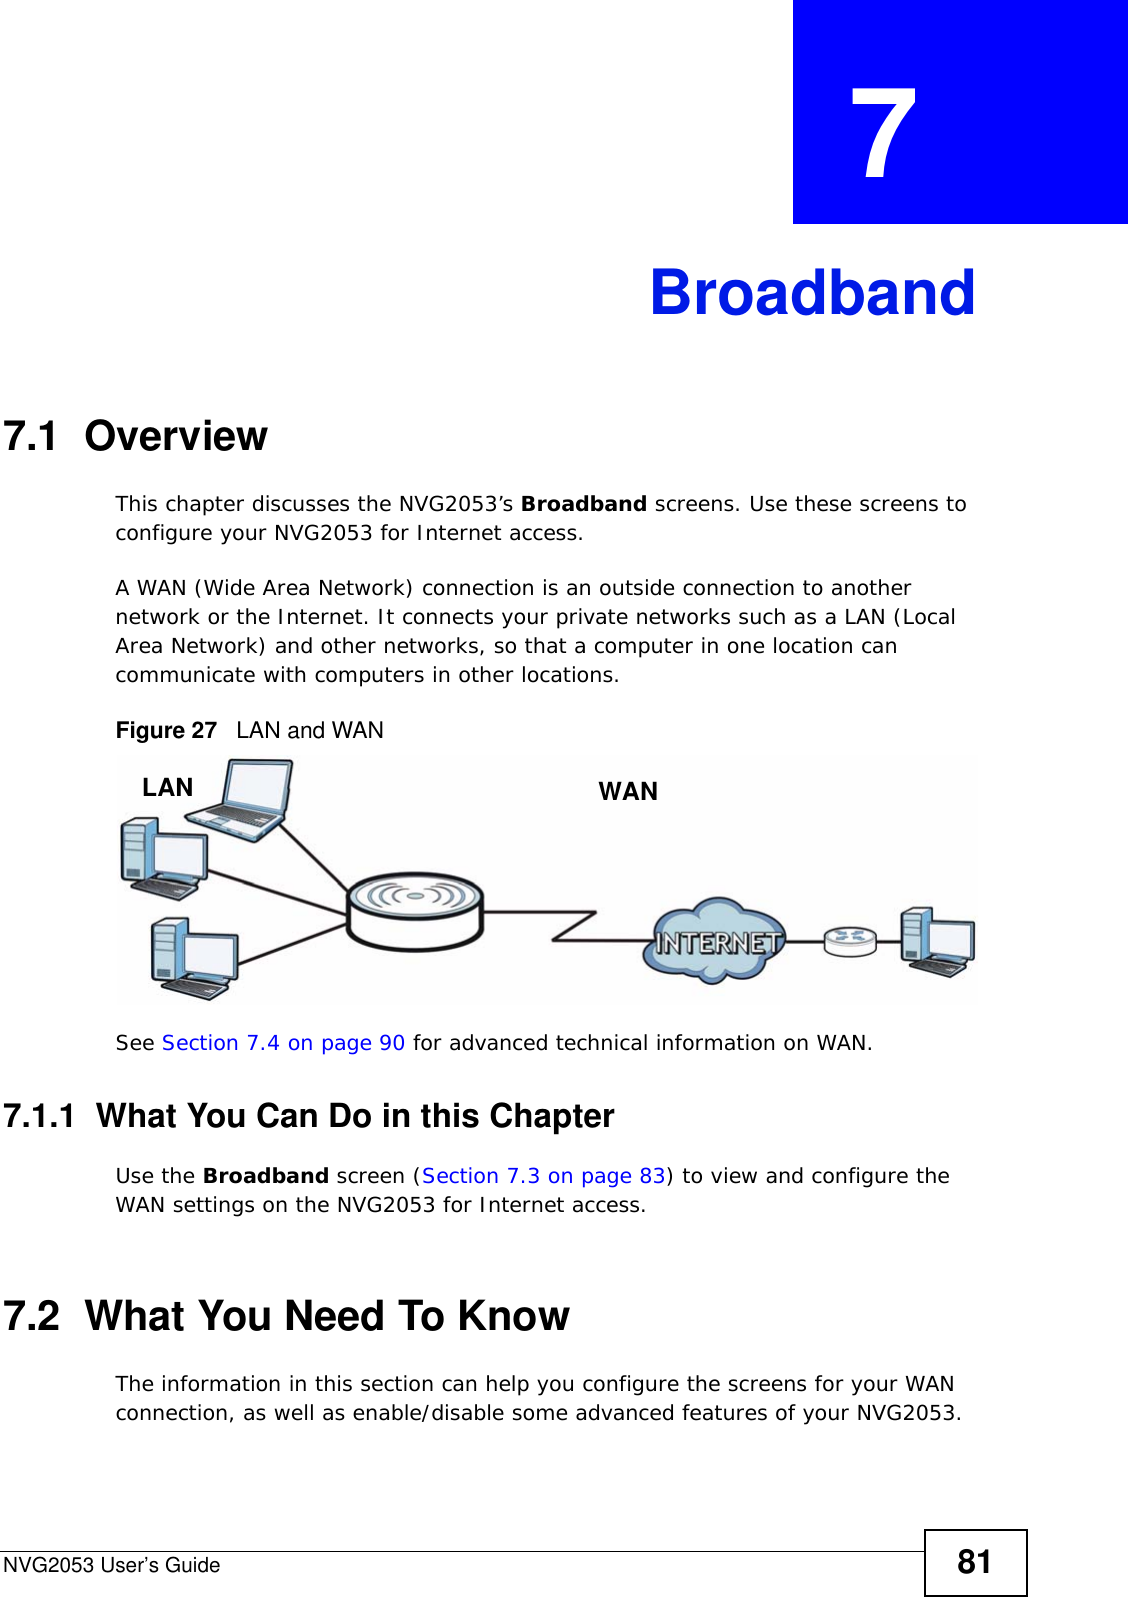 NVG2053 User’s Guide 81CHAPTER  7 Broadband7.1  OverviewThis chapter discusses the NVG2053’s Broadband screens. Use these screens to configure your NVG2053 for Internet access.A WAN (Wide Area Network) connection is an outside connection to another network or the Internet. It connects your private networks such as a LAN (Local Area Network) and other networks, so that a computer in one location can communicate with computers in other locations.Figure 27   LAN and WANSee Section 7.4 on page 90 for advanced technical information on WAN.7.1.1  What You Can Do in this ChapterUse the Broadband screen (Section 7.3 on page 83) to view and configure the WAN settings on the NVG2053 for Internet access.7.2  What You Need To KnowThe information in this section can help you configure the screens for your WAN connection, as well as enable/disable some advanced features of your NVG2053.WANLAN